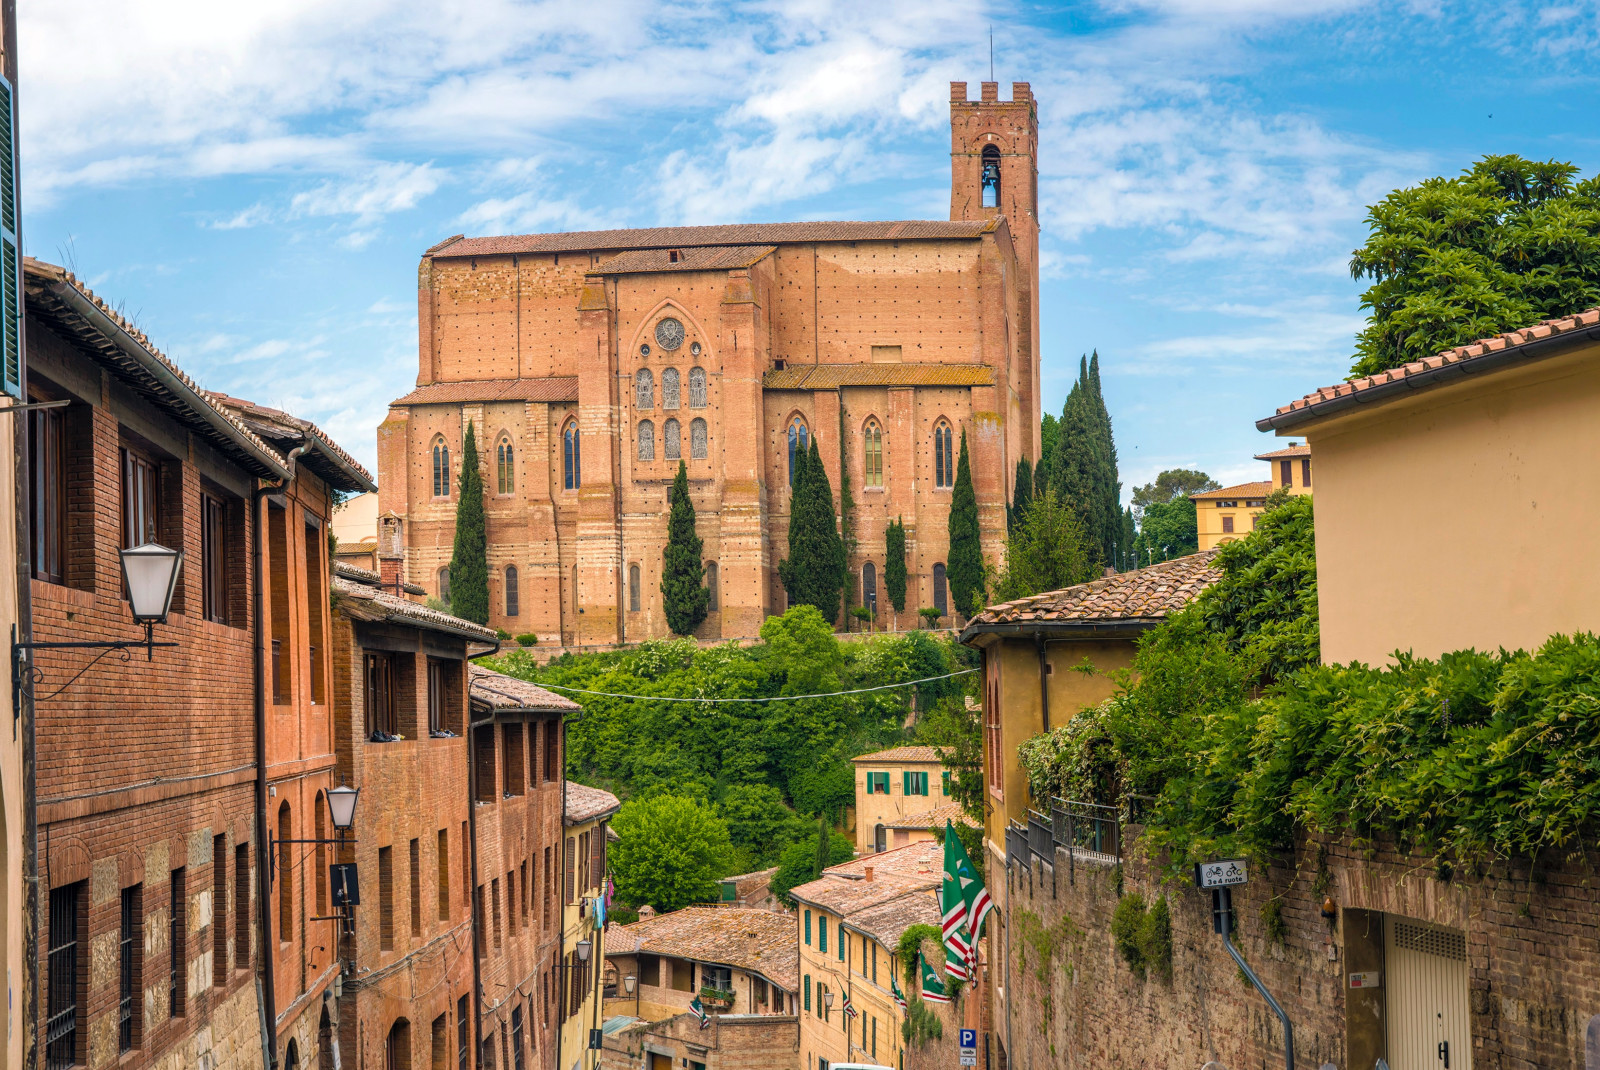 A tan-orange church surrounded by brown buildings and green trees in Siena, Italy.